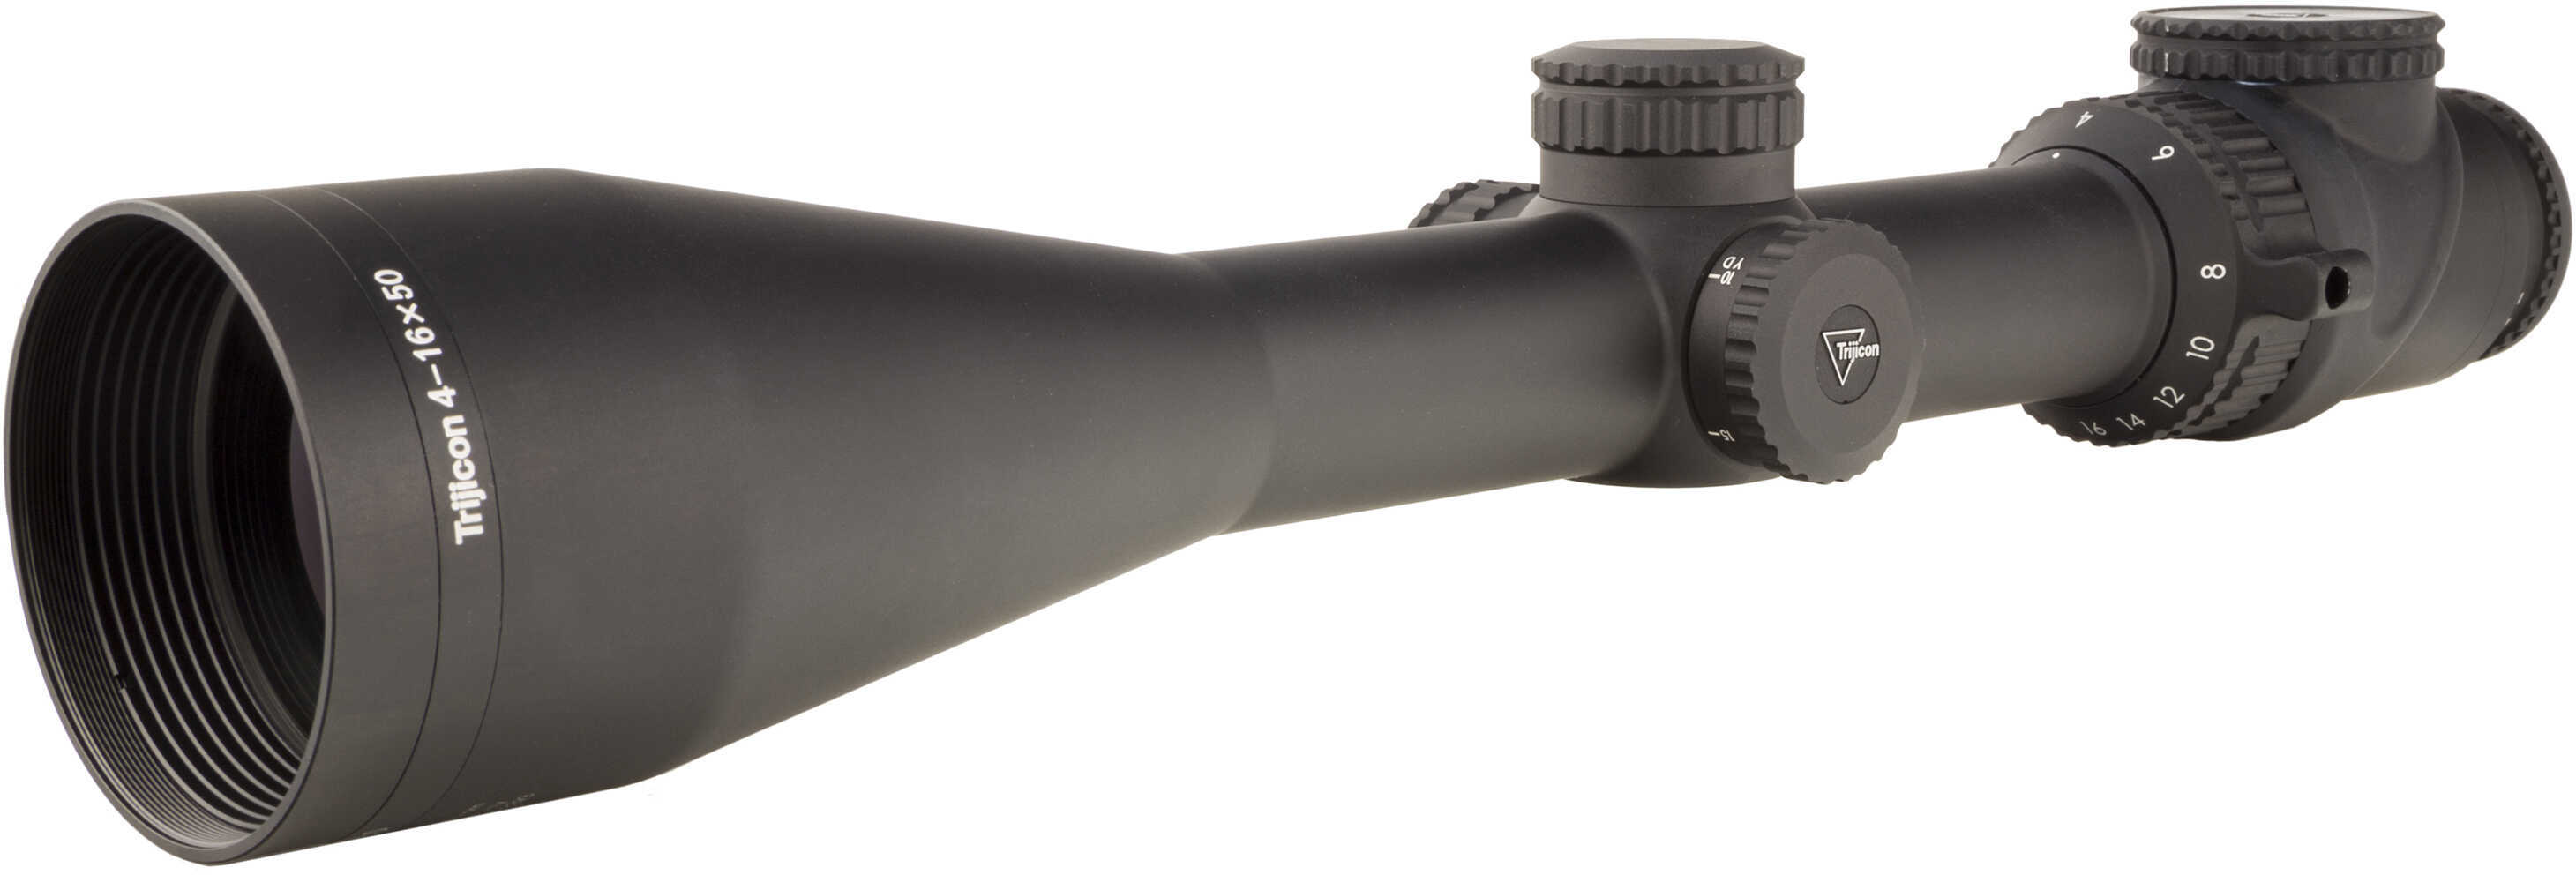 AccuPoint 4-16x50mm Riflescope 30mm Tube, MOA-Dot Crosshair with Green Dot, Black Md: TR29-C-200132